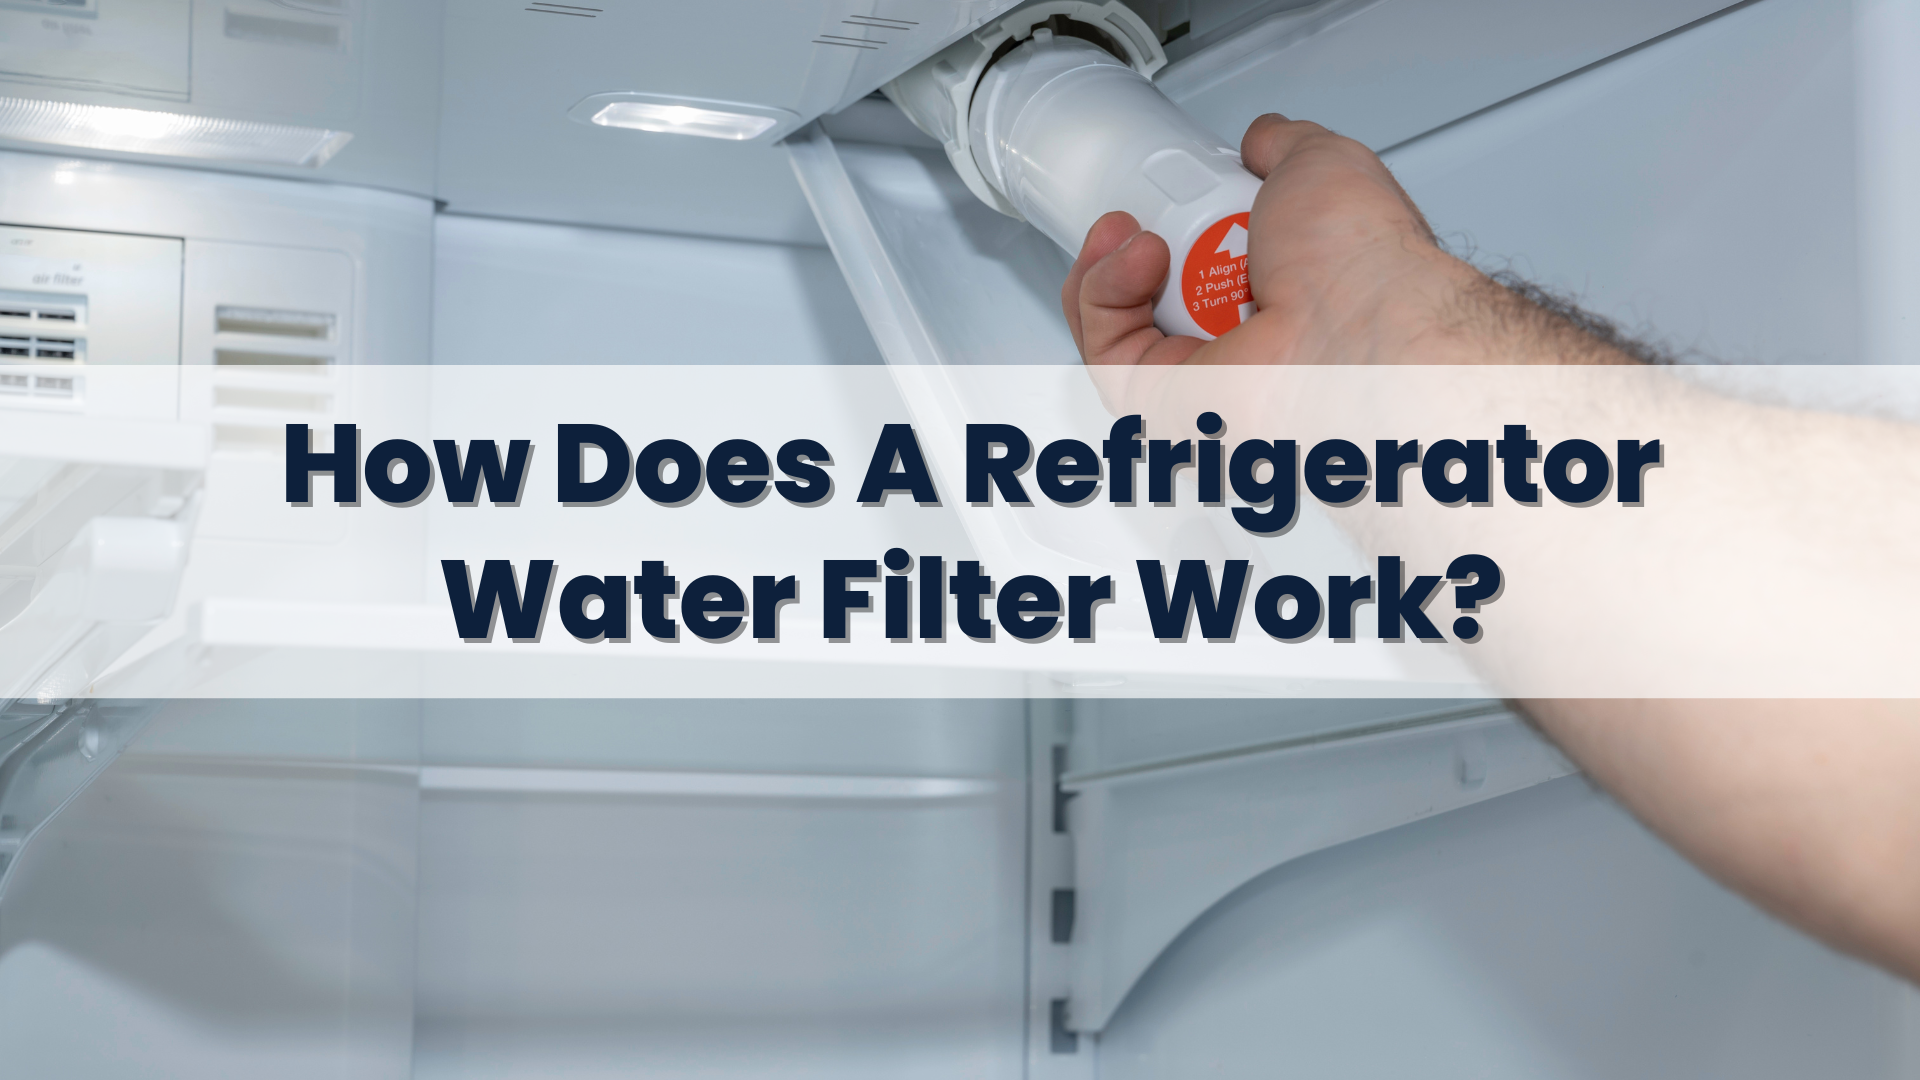 How does a refrigerator water filter work